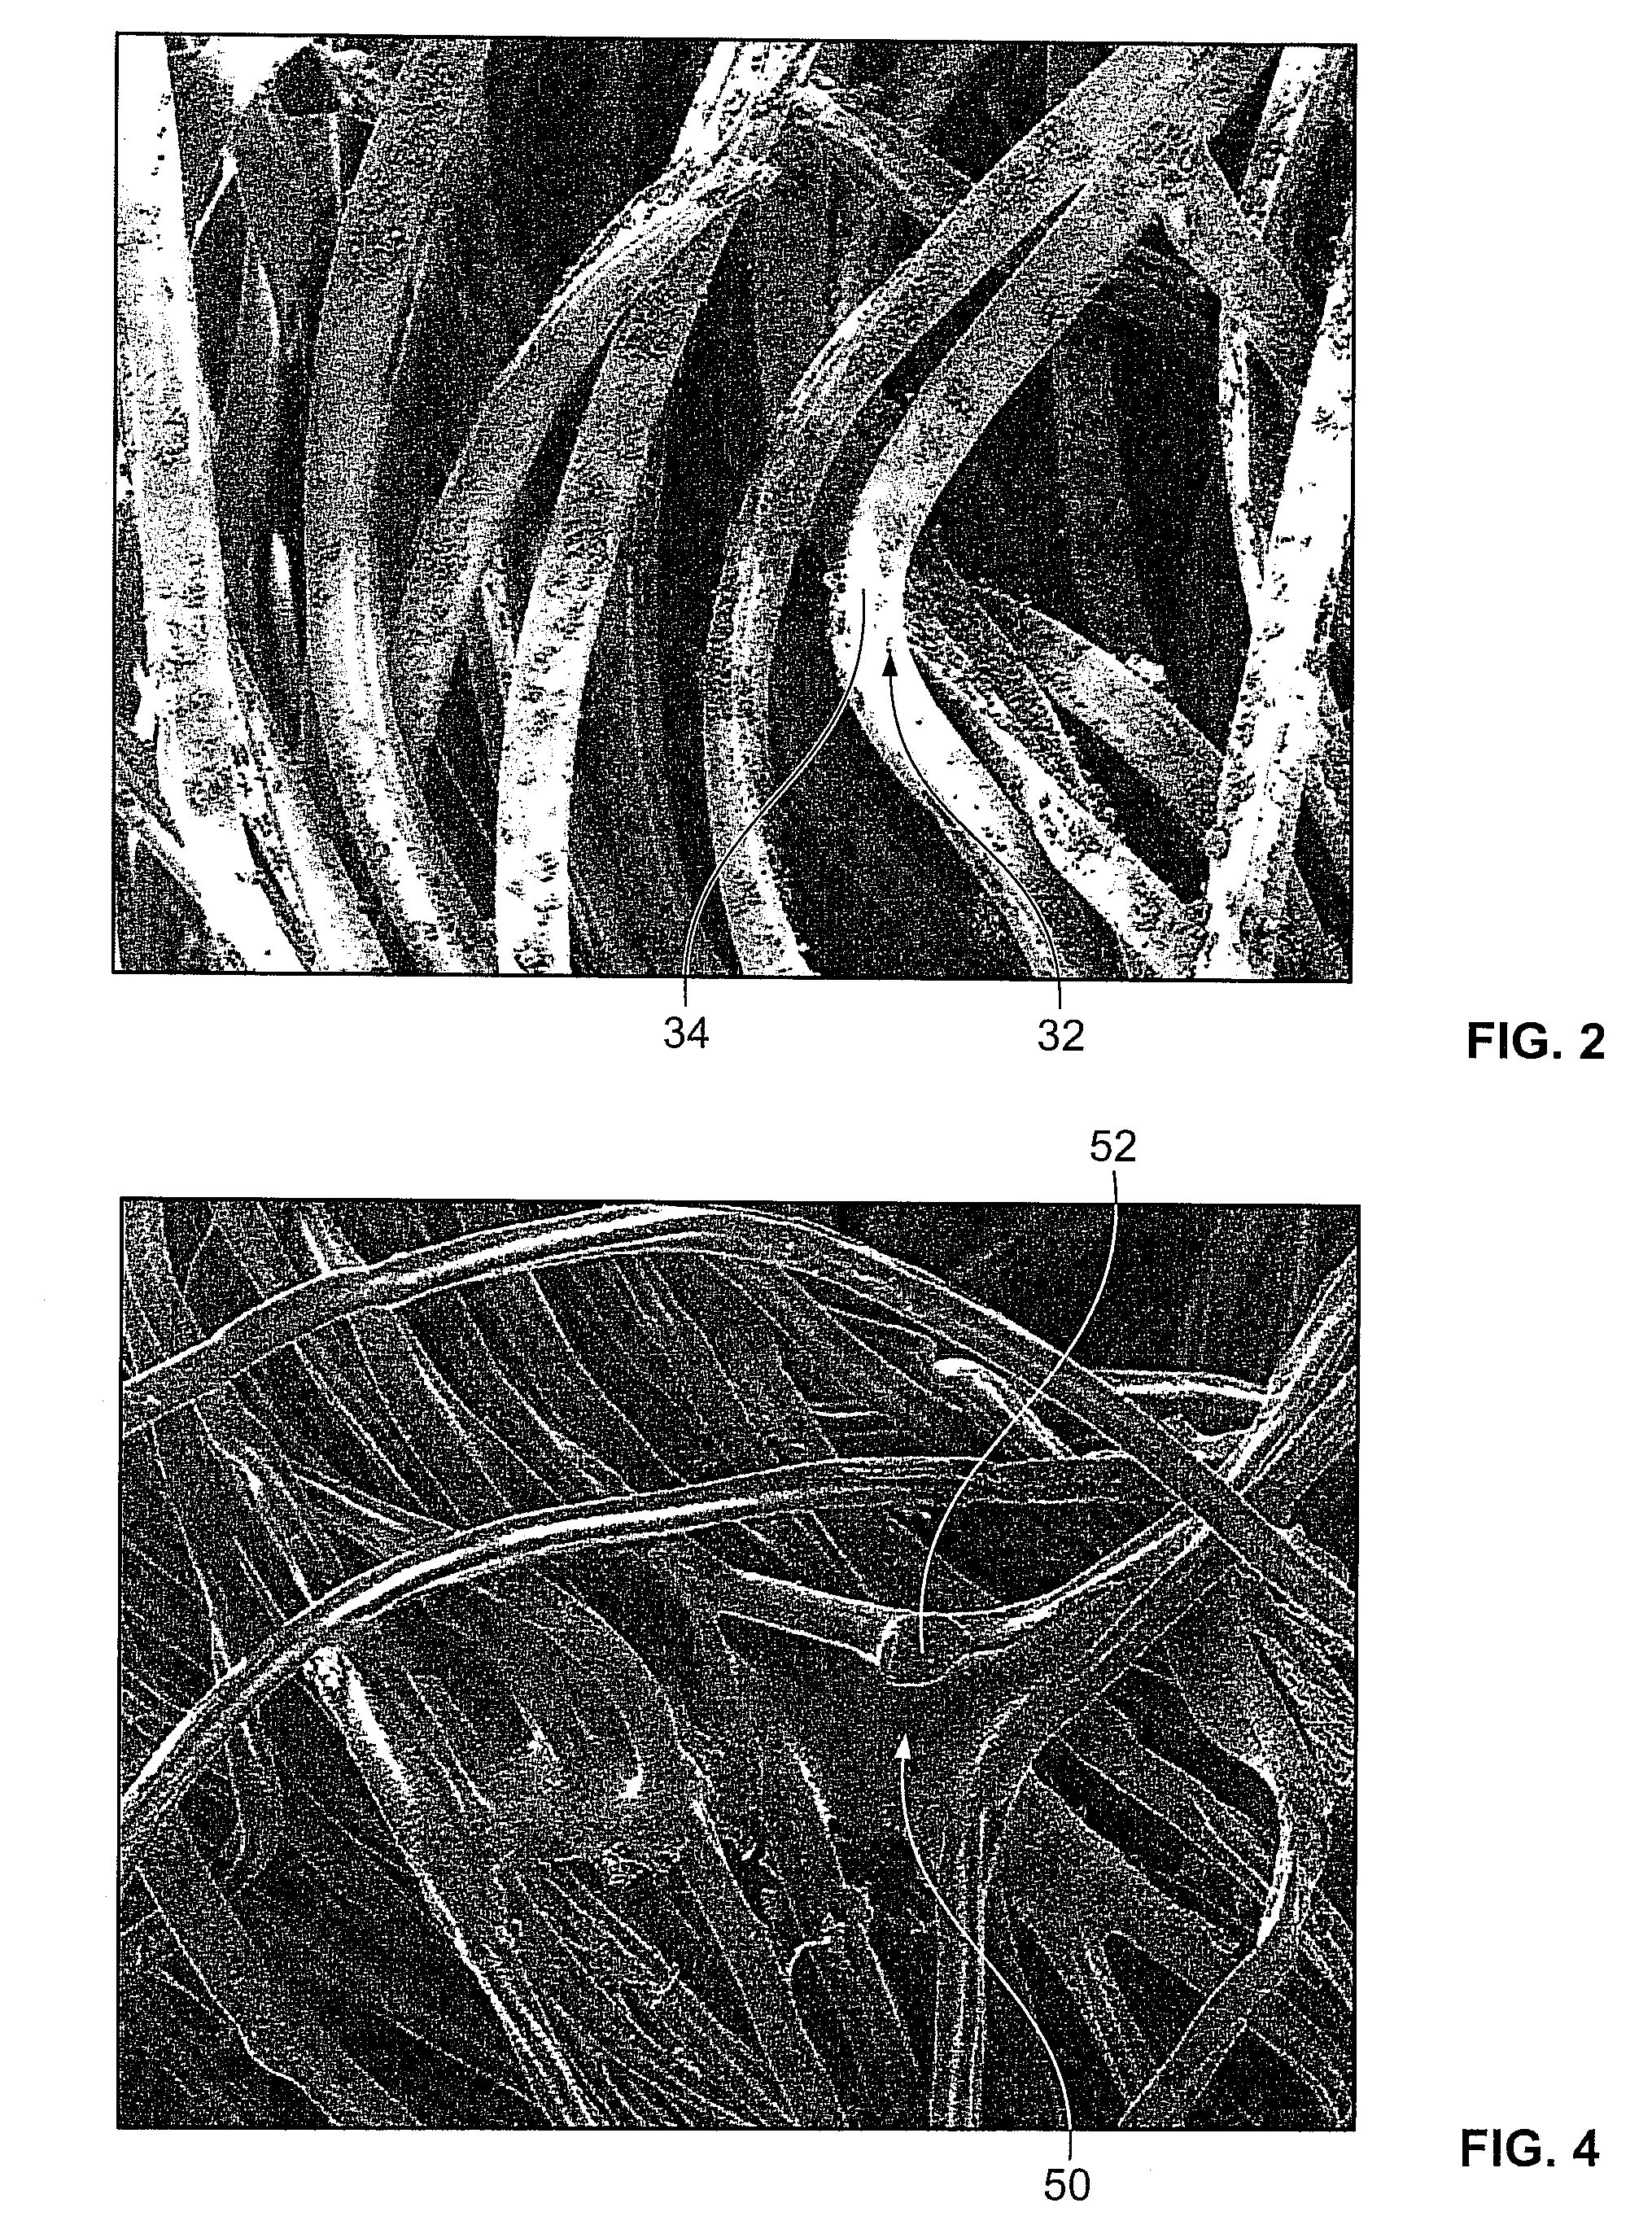 Method of affixing a design to a surface